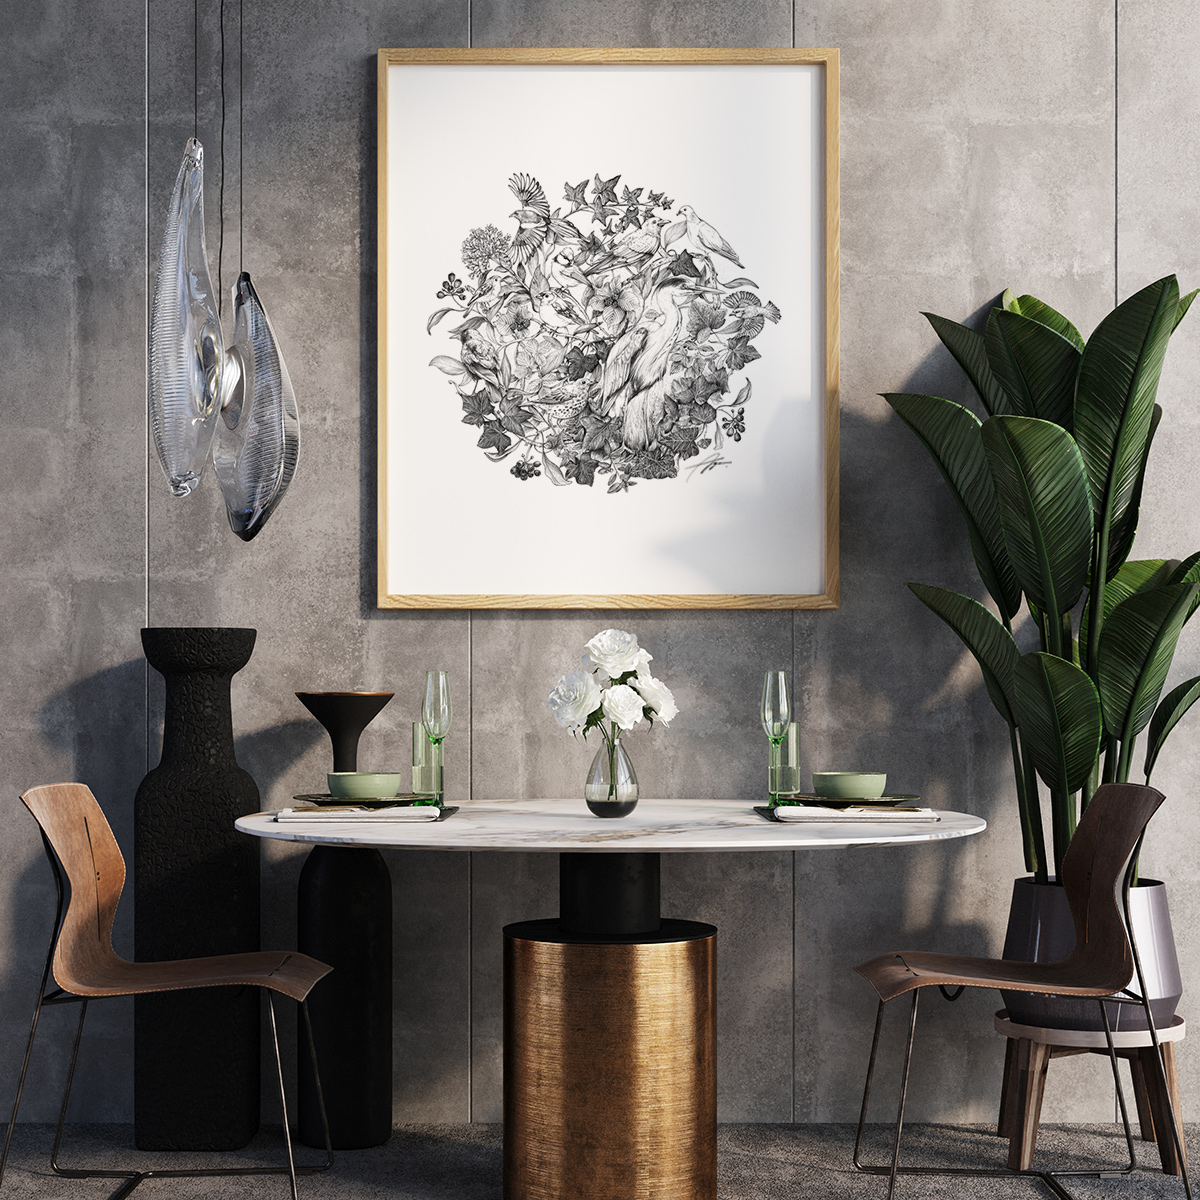 a modern dining area of a hotel with a black and white pen wildlife art of birds and plants by Aga Grandowicz